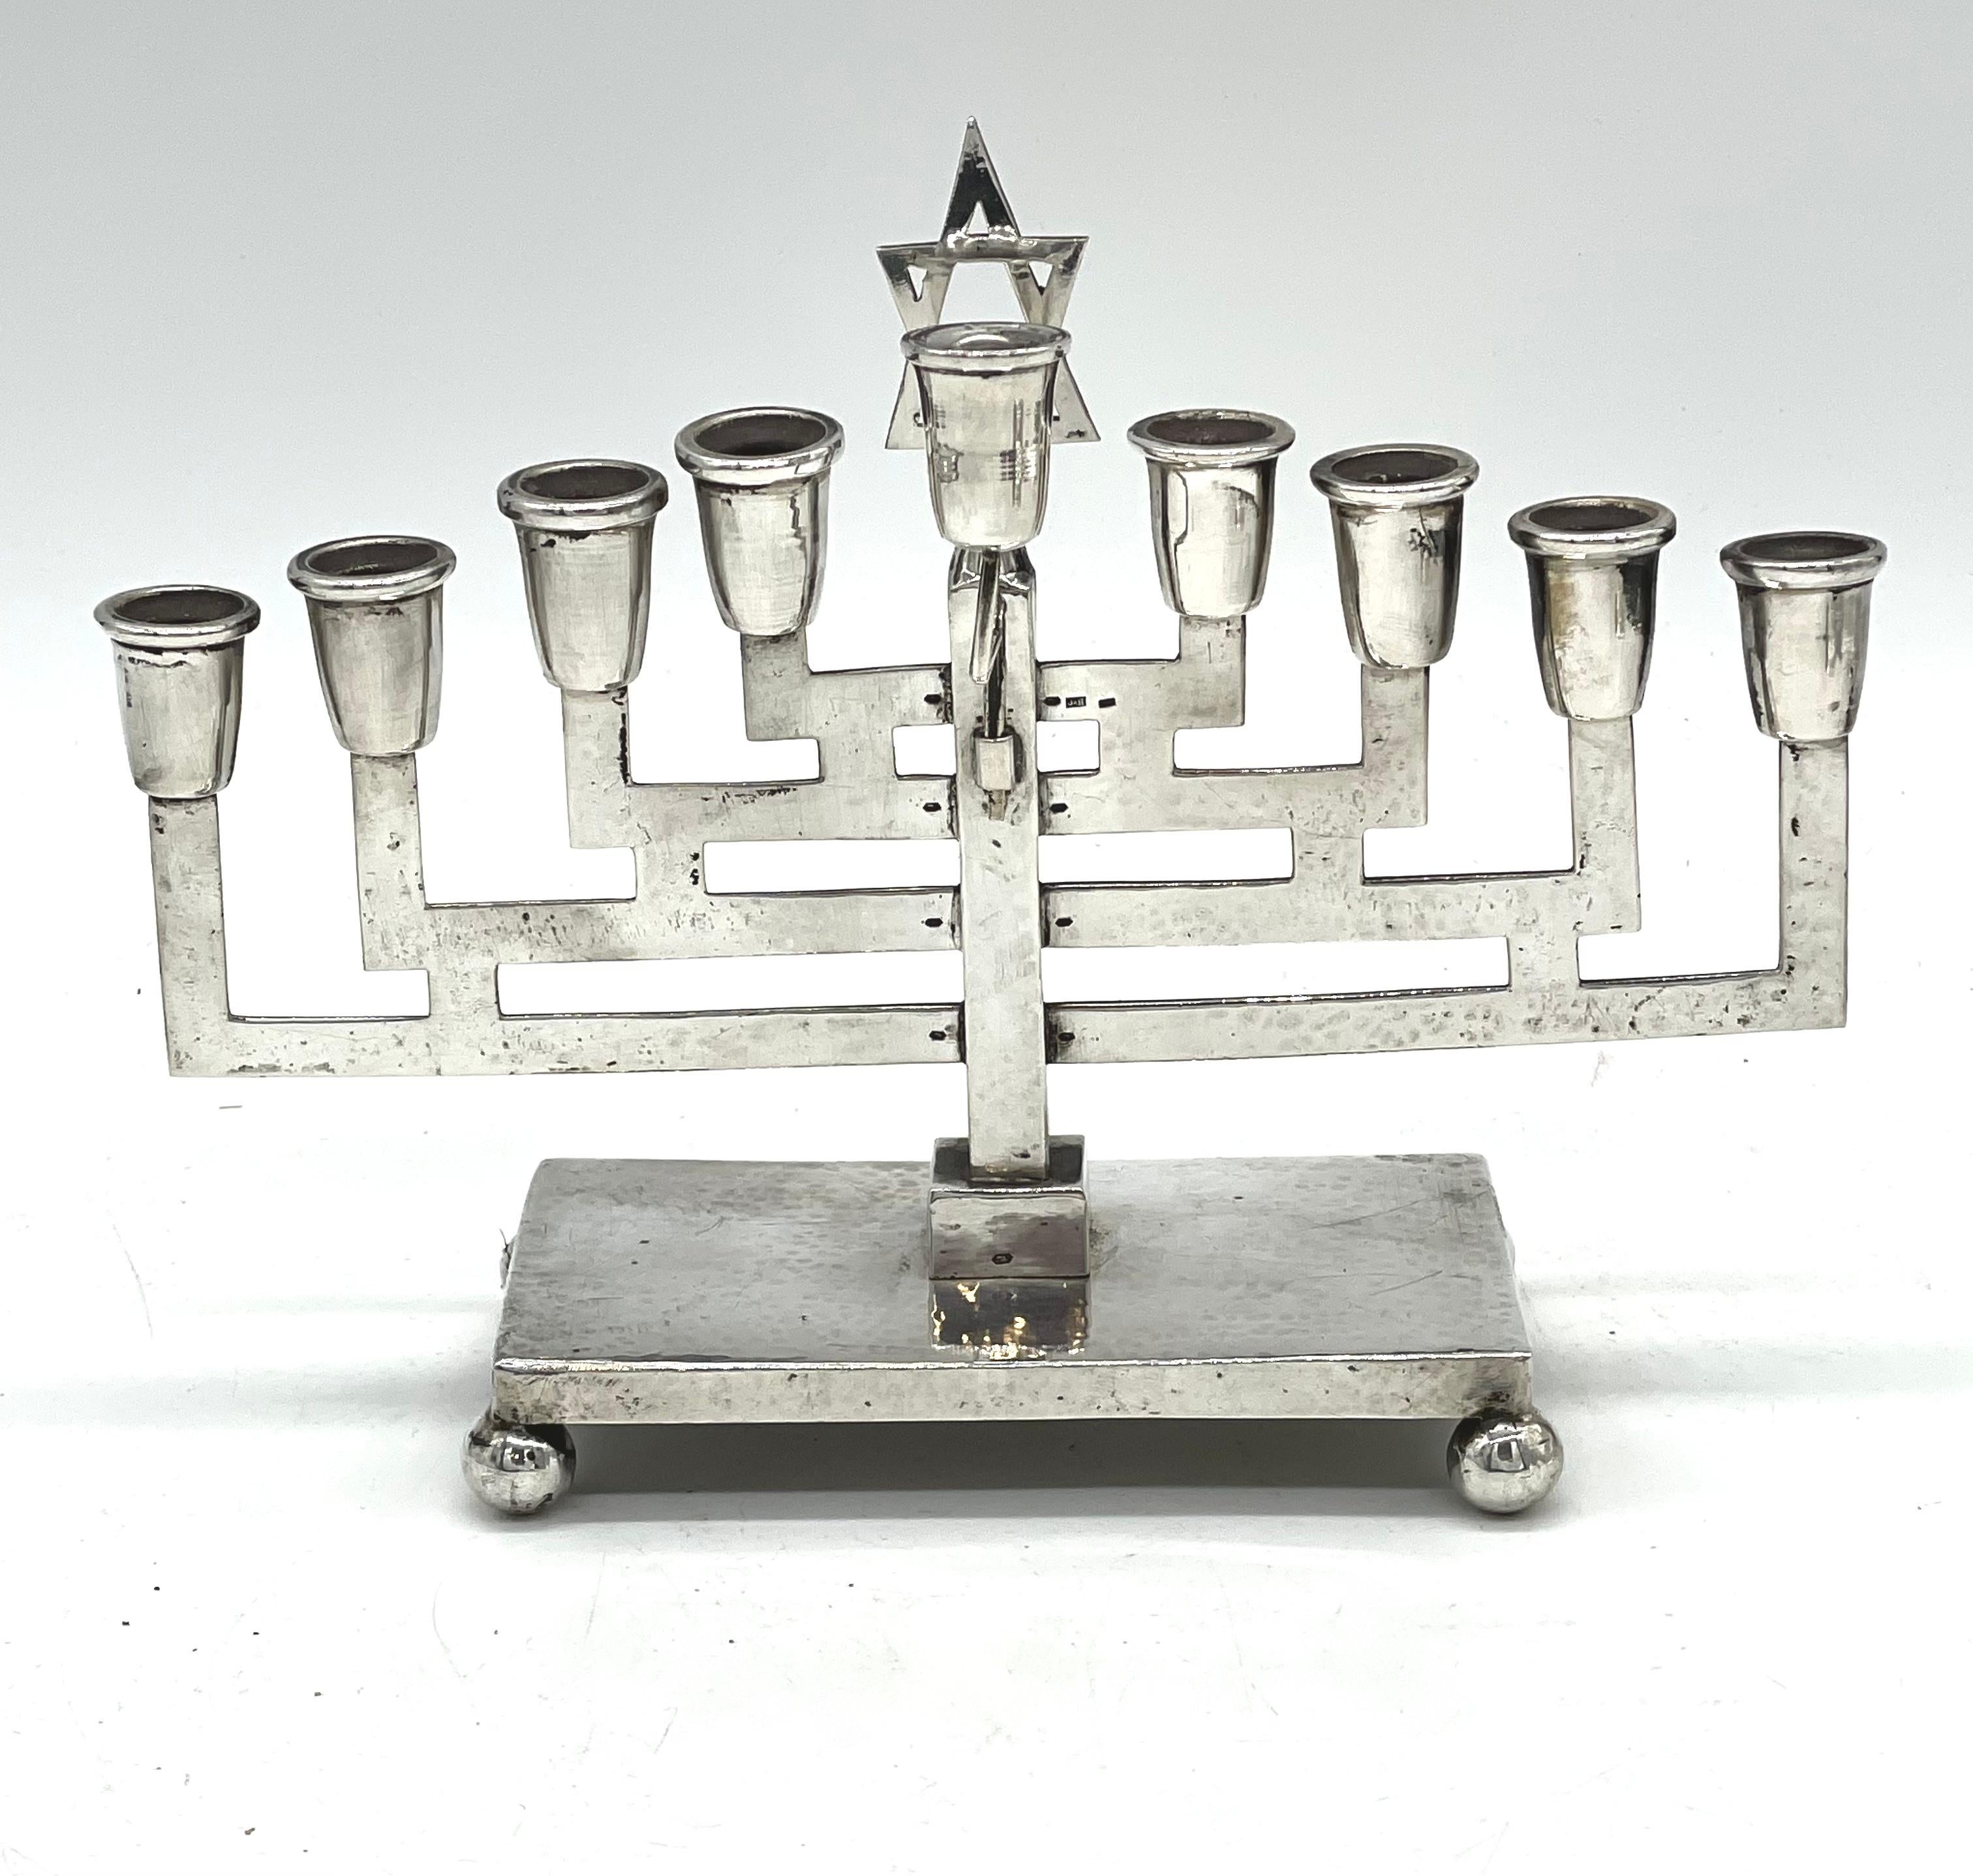 Austrian silver Hanukkah lamp is handmade and features nine candleholders in Art Deco style. The stylized candleholders are supported by tiers of geometric patterns with a harmonious toppling of arranged, broken up lines accompanied by detailed